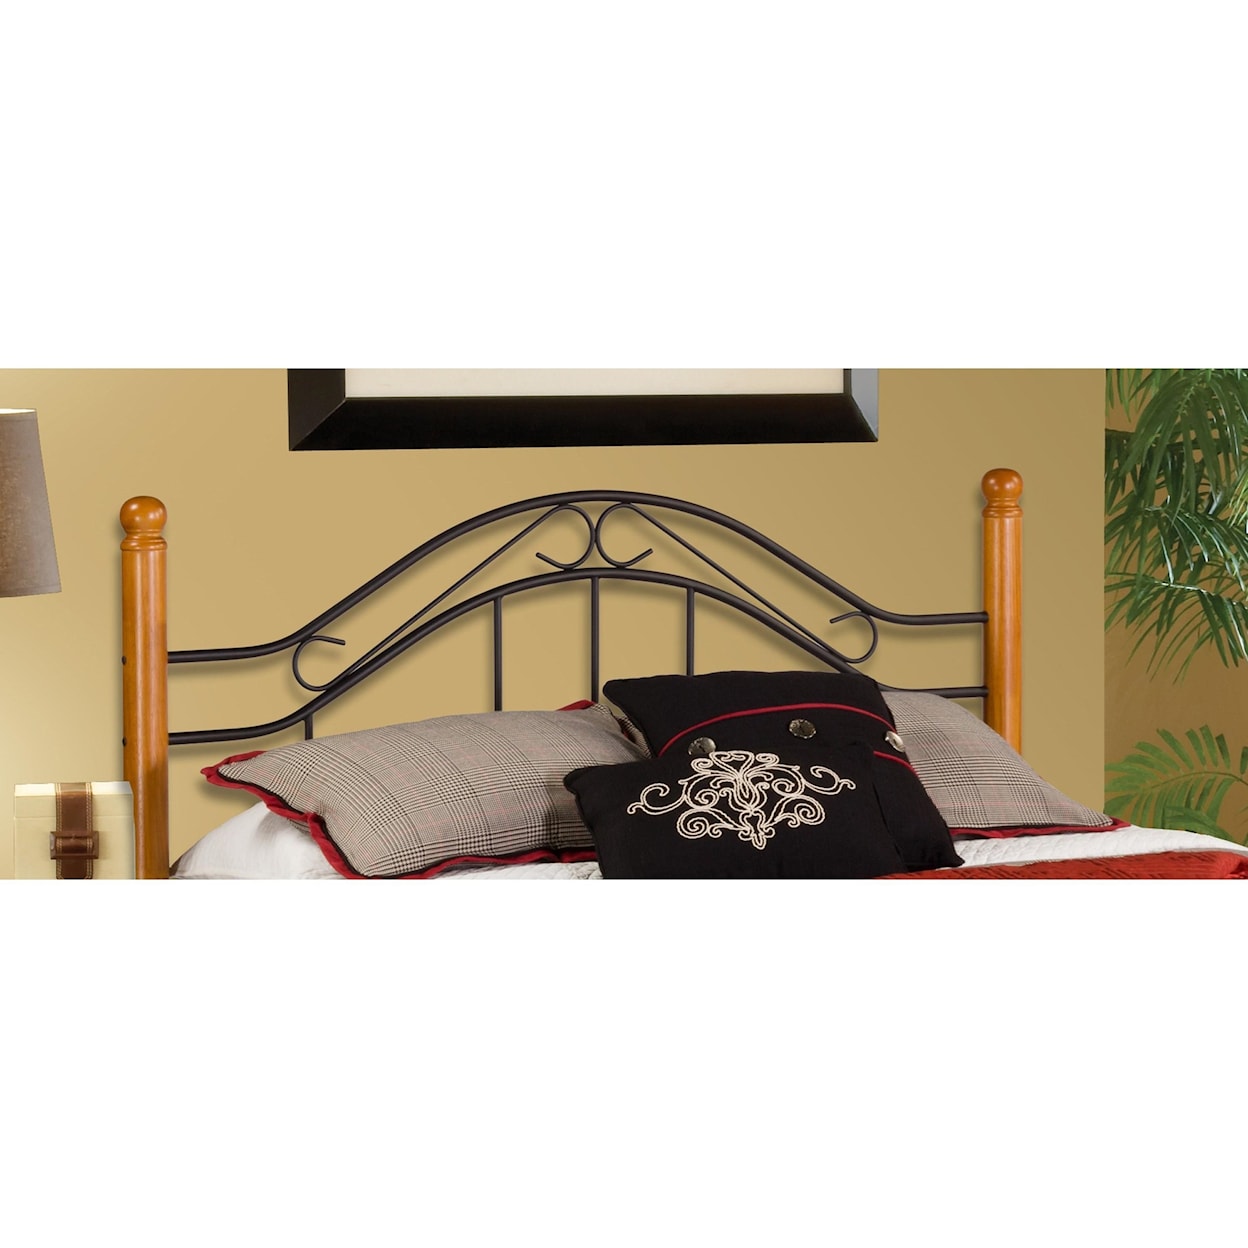 Hillsdale Wood Beds King Headboard with Frame